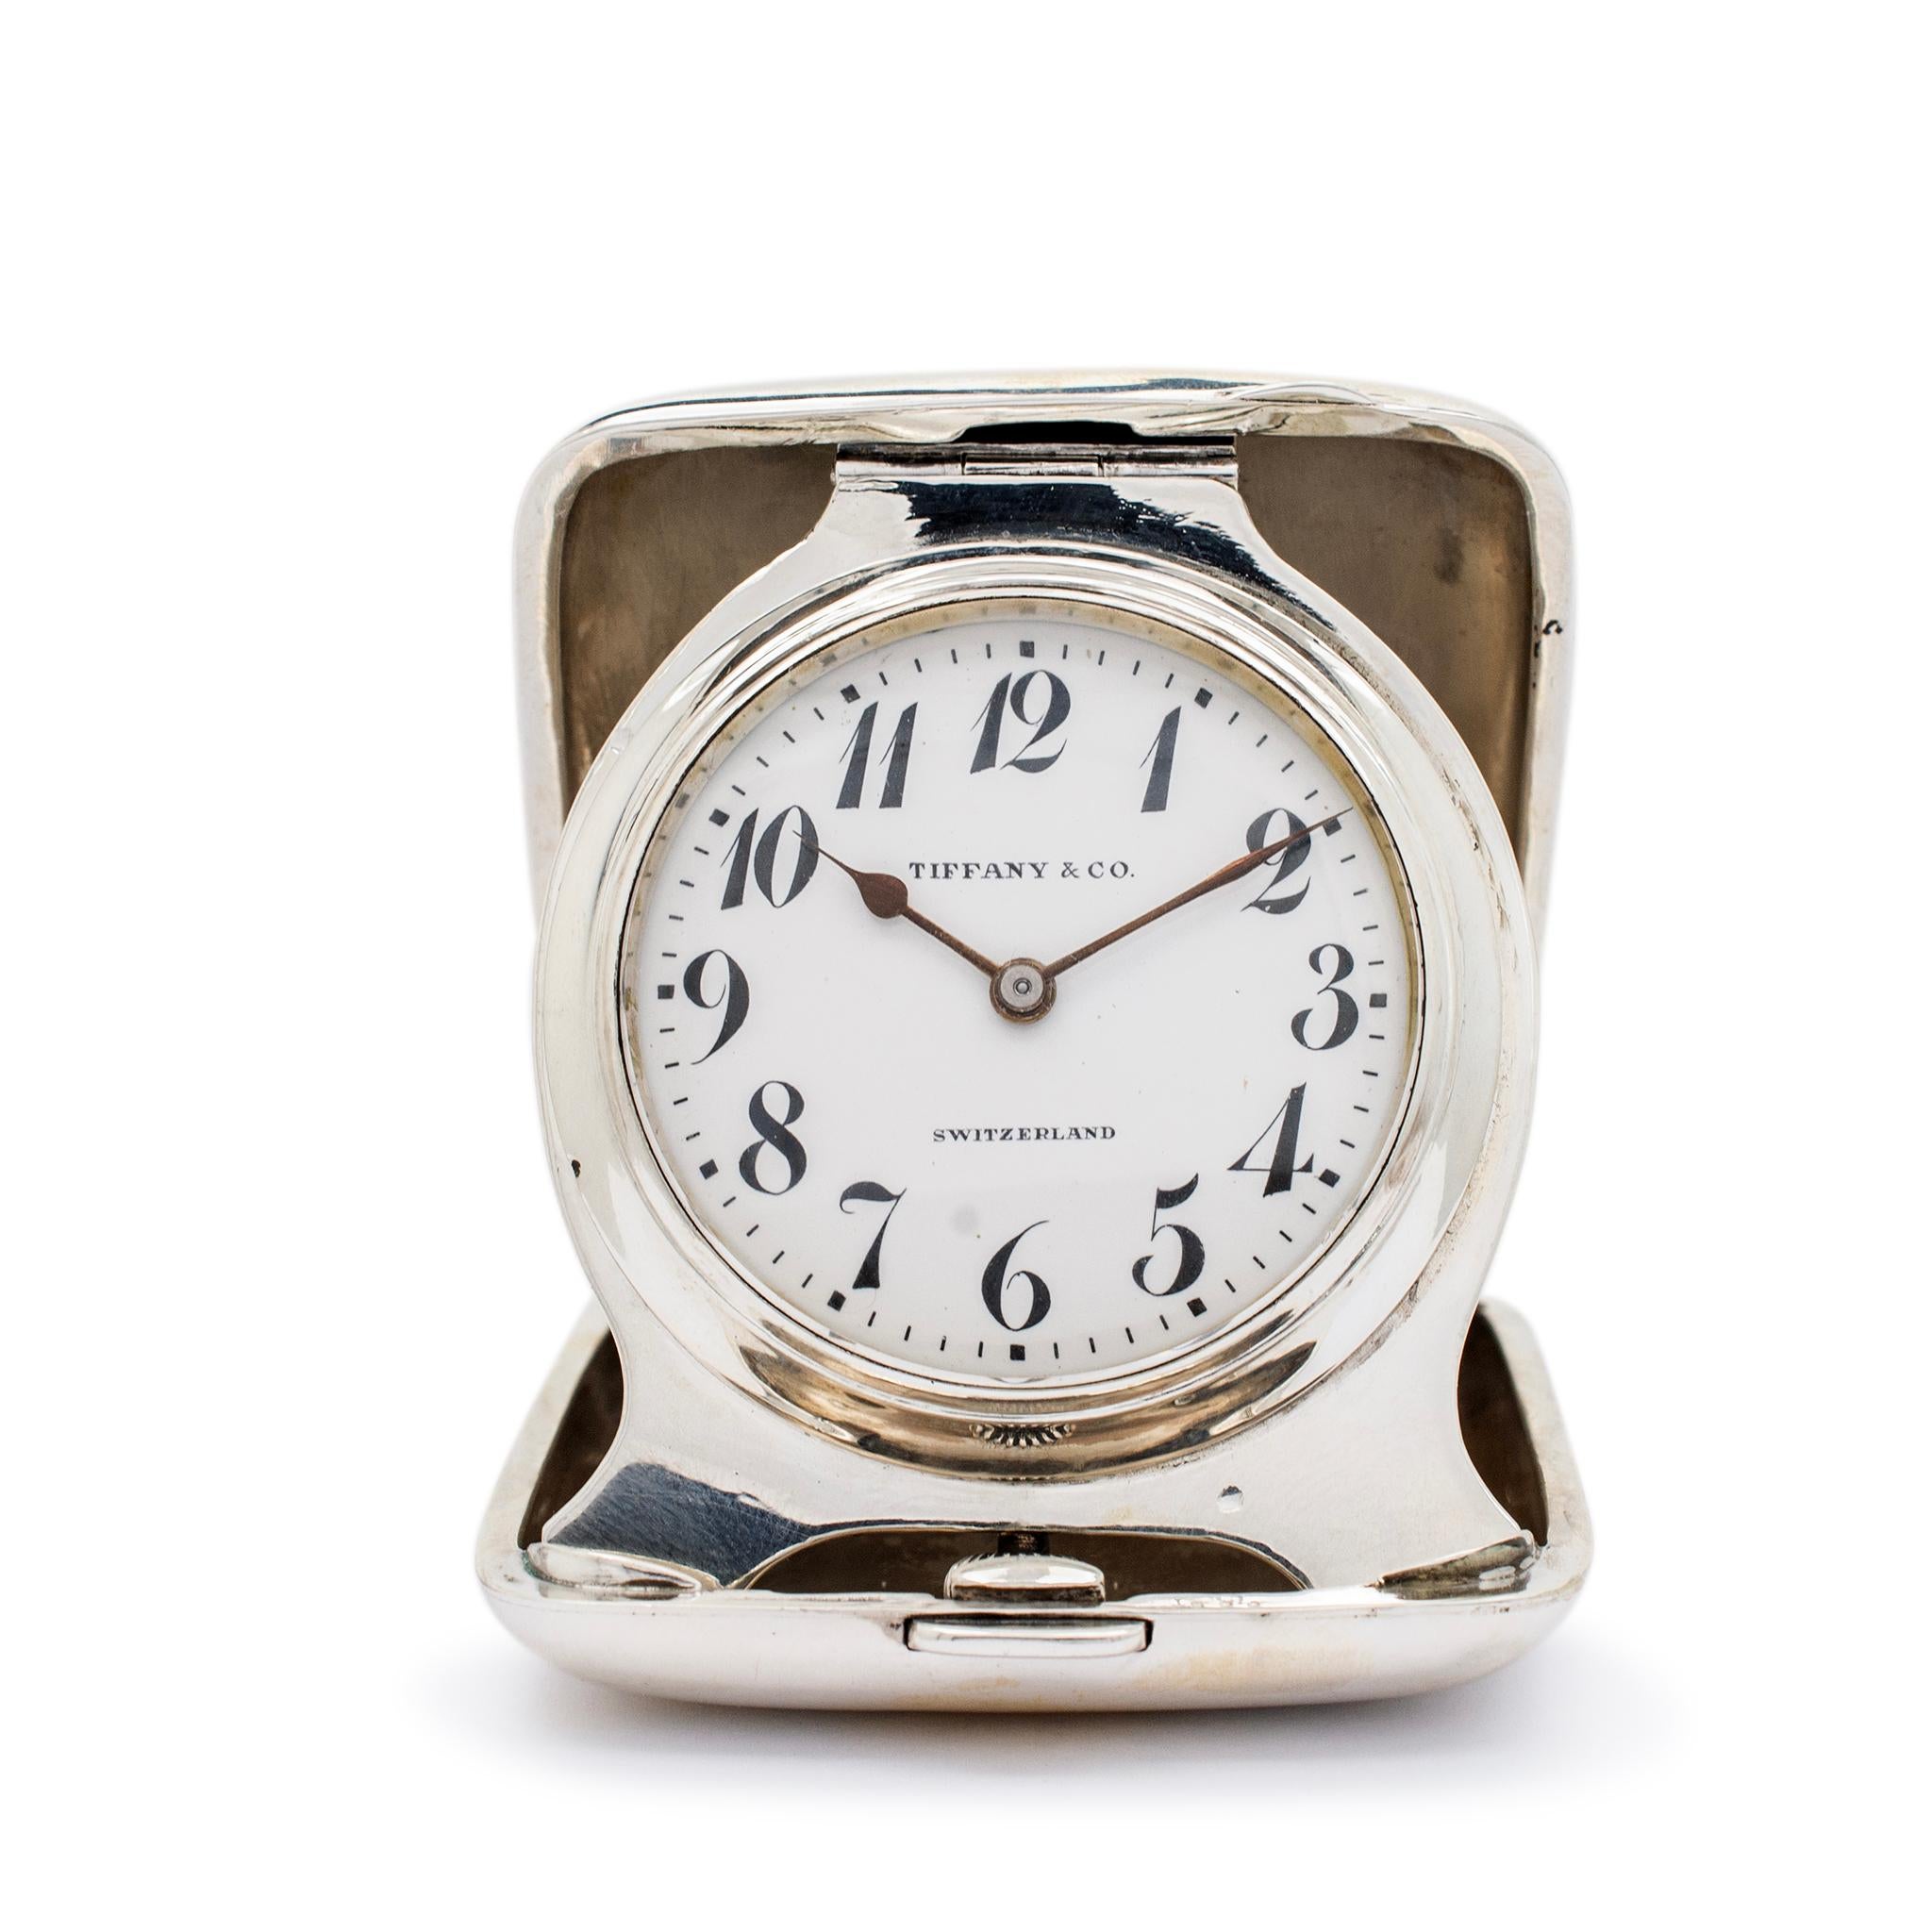 Brand: Tiffany & Co.

Metal Type: 925 Sterling Silver

Thickness: 0.25 inches

Length: 3.00 inches

Width: 2.25 inches

Weight: 221.31 grams

One silver, Swiss-made Vintage Tiffany & Co. pocket watch. The metal was tested and determined to be 925